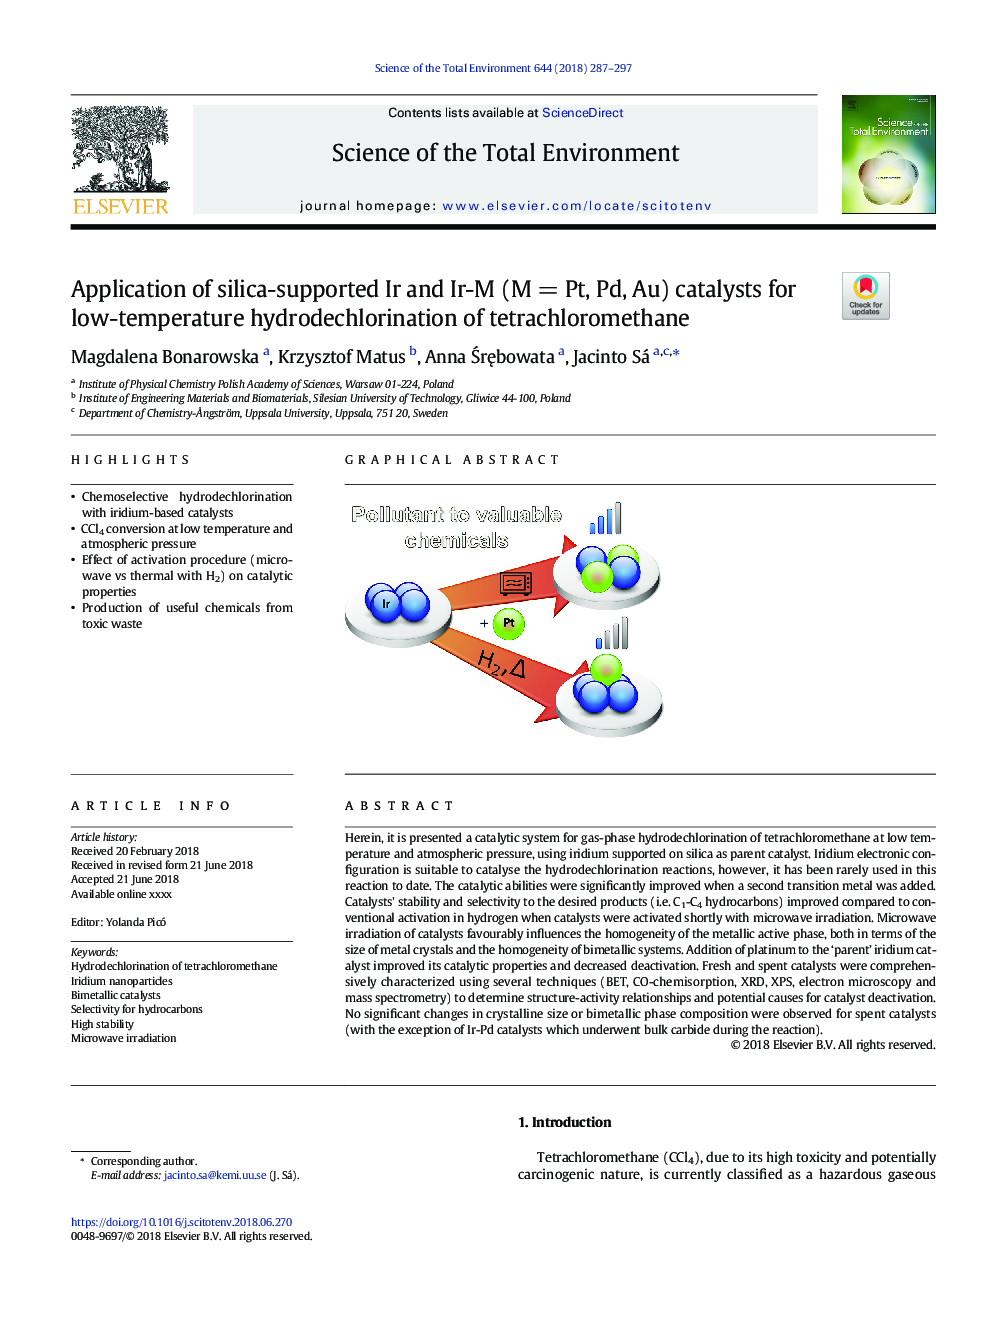 Application of silica-supported Ir and Ir-M (Mâ¯=â¯Pt, Pd, Au) catalysts for low-temperature hydrodechlorination of tetrachloromethane